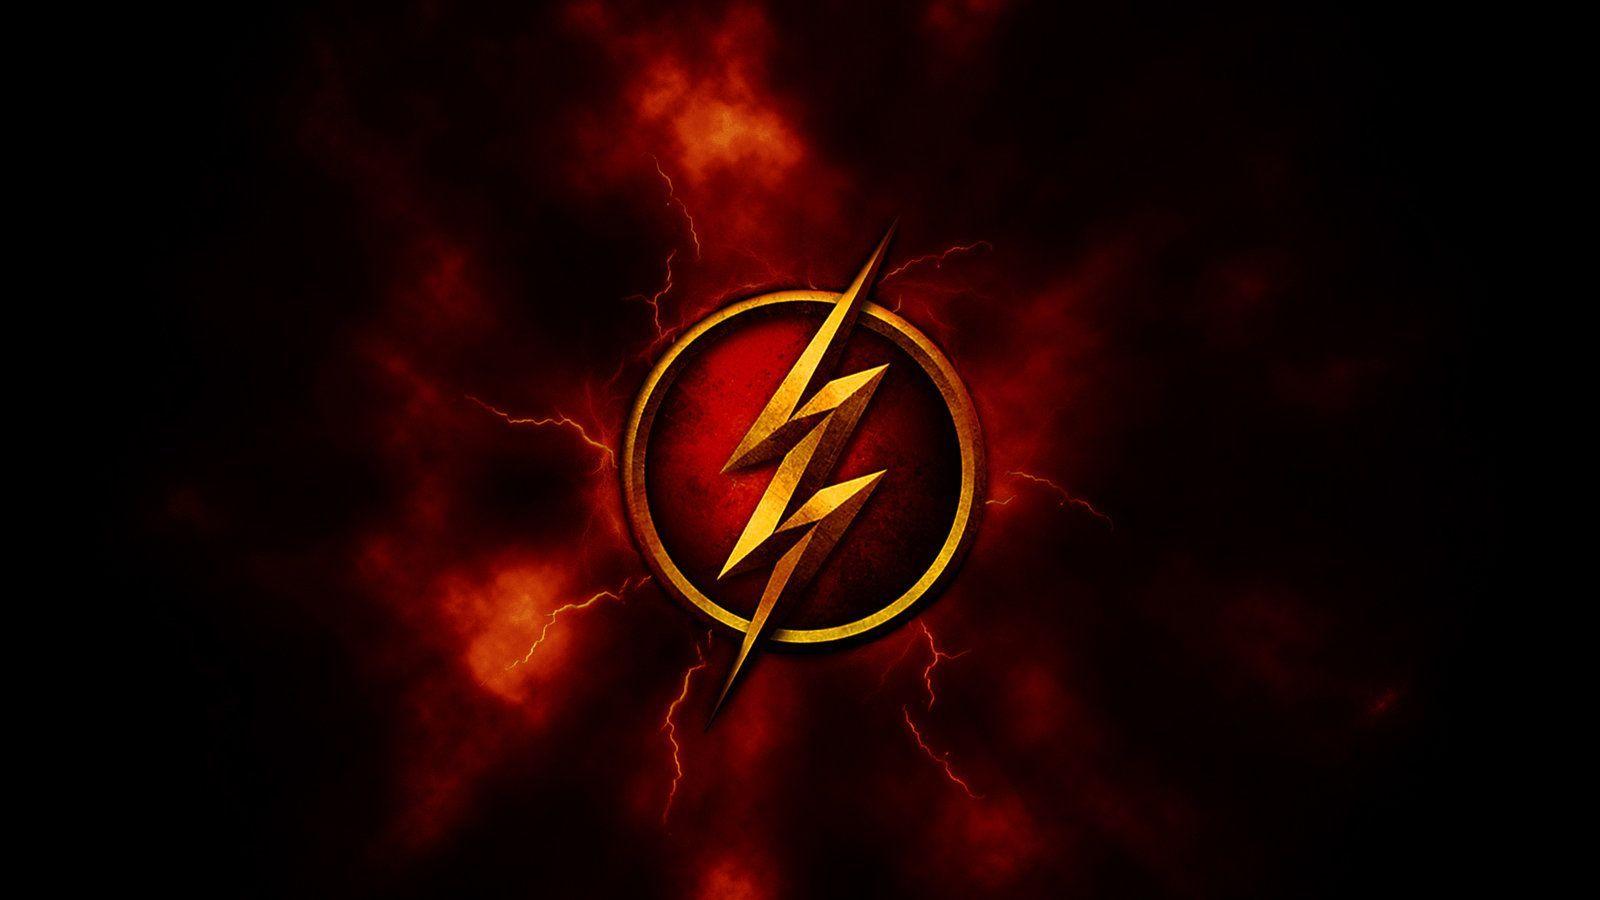 The Flash Wallpaper 2 by ImagineAiArt99 on DeviantArt